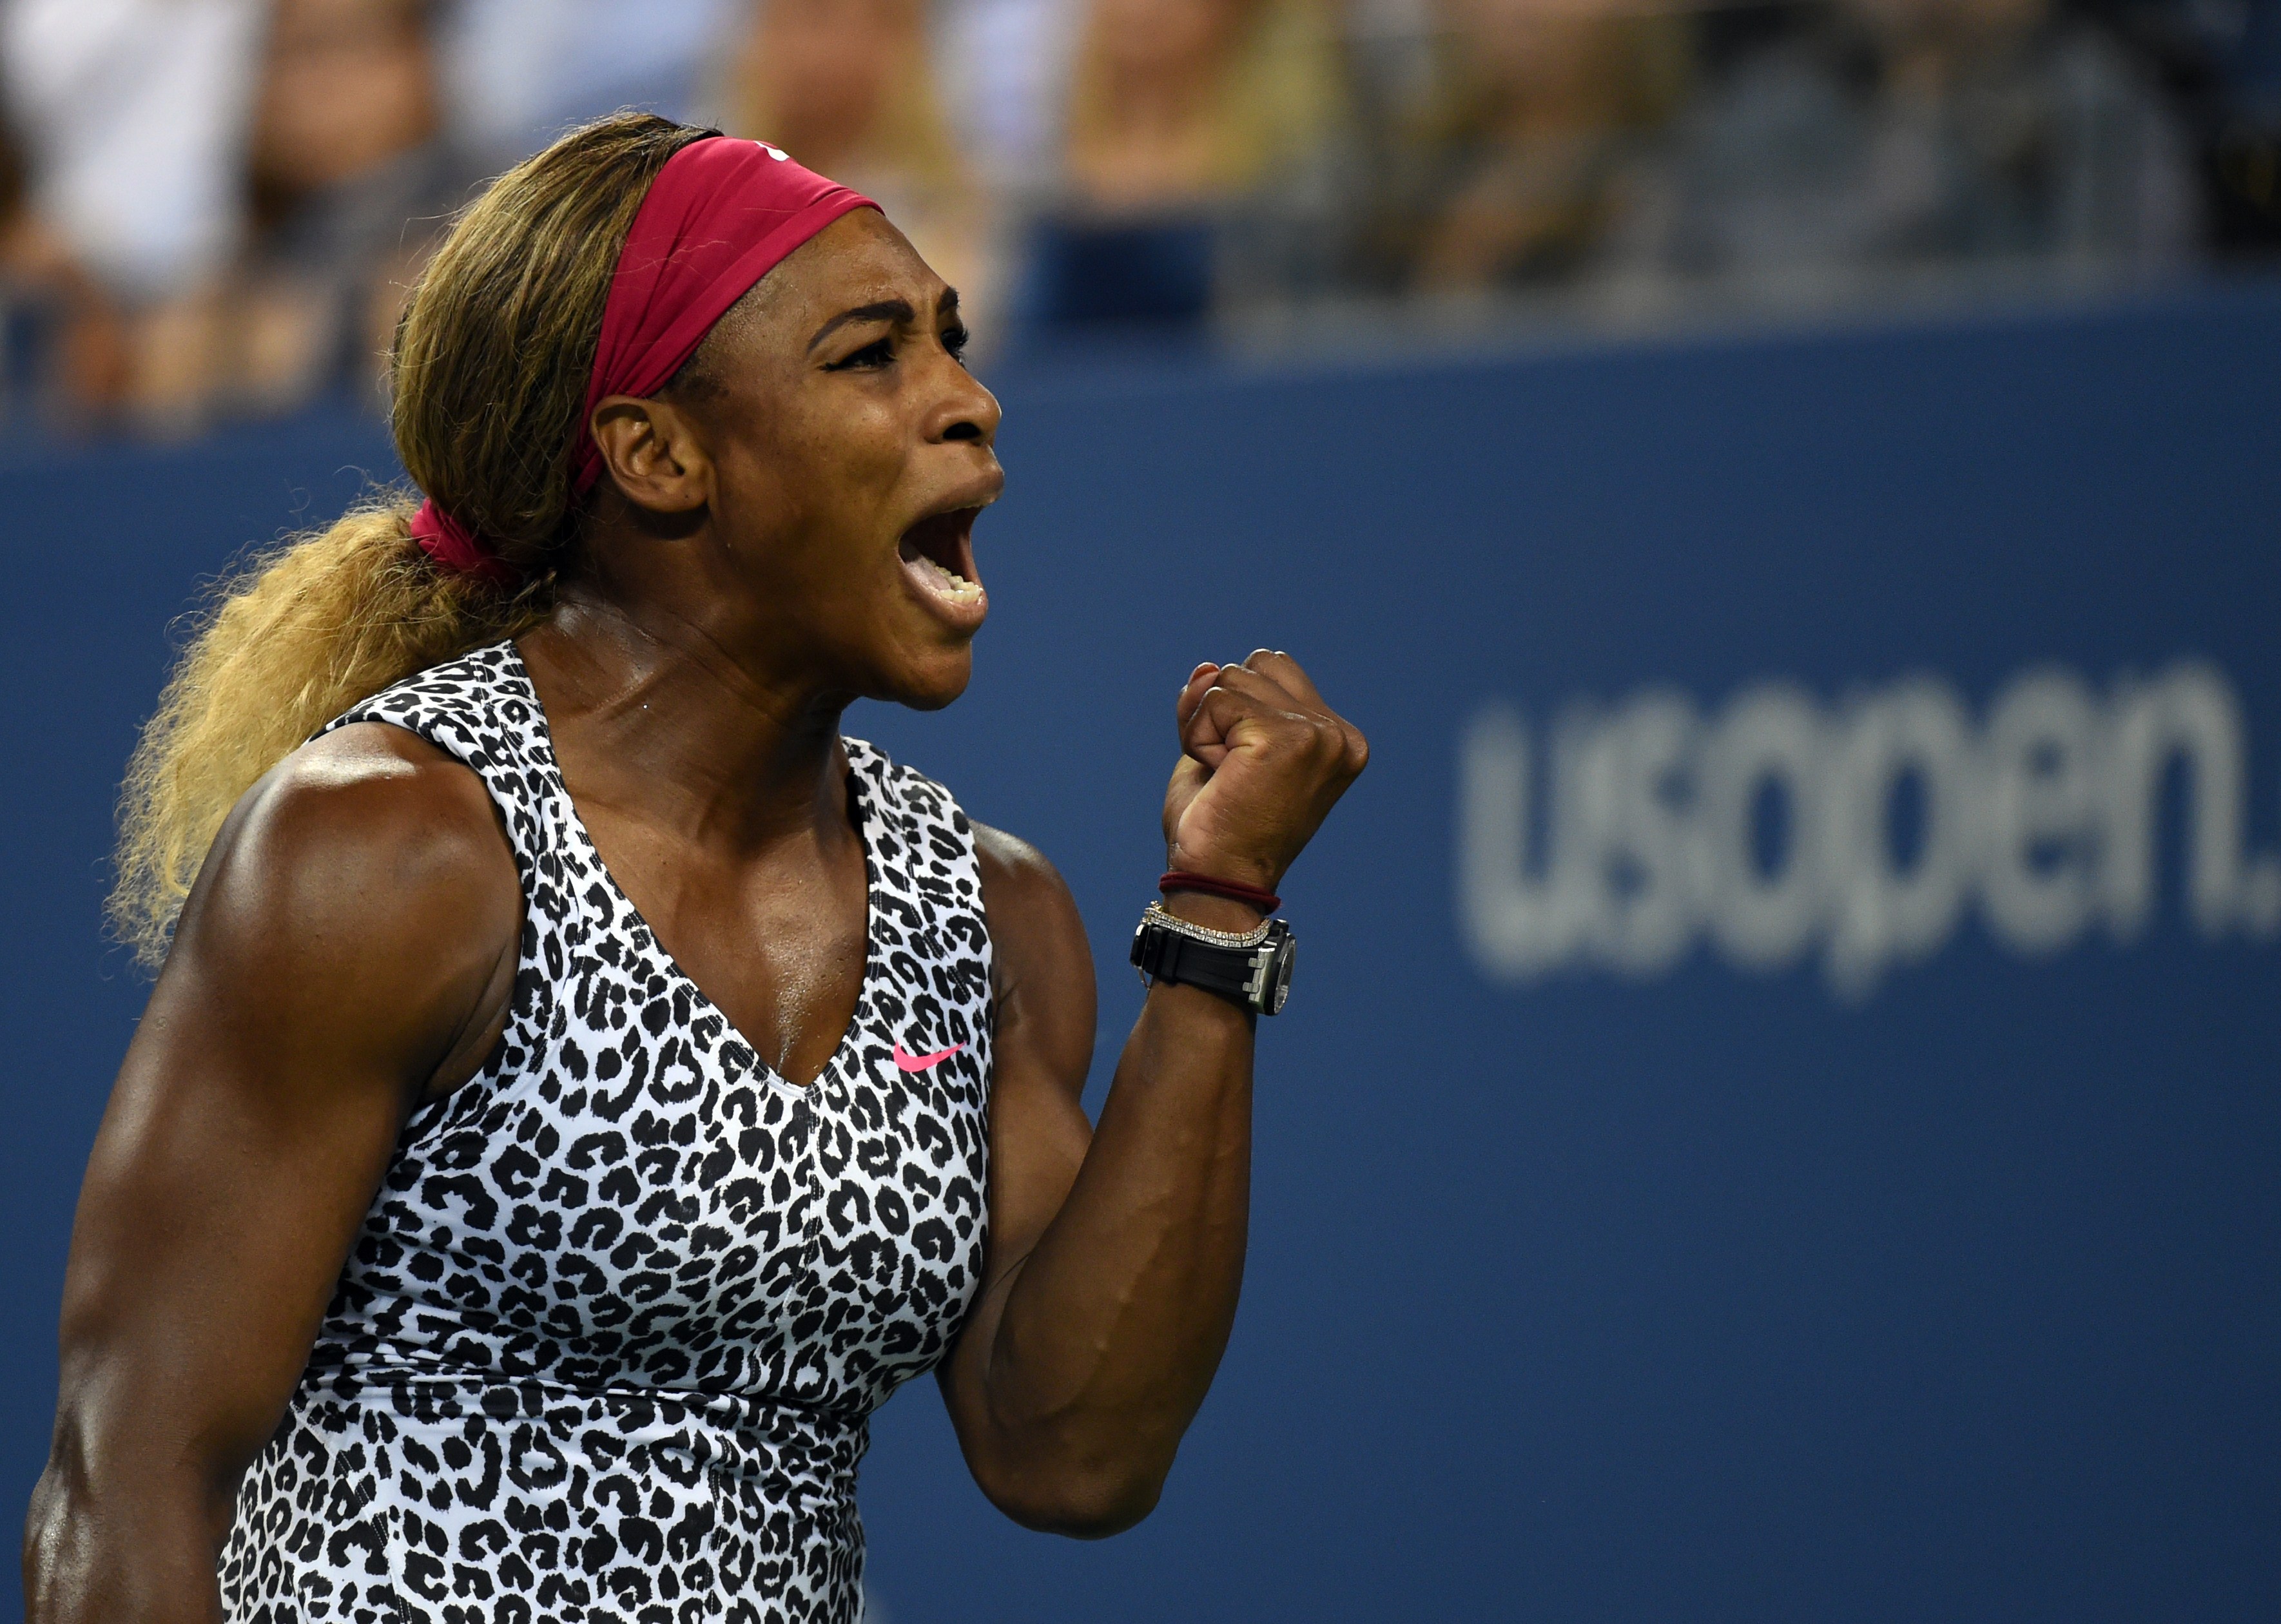 Serena Williams of the US celebrates the first set point against Flavia Pennetta of Italy during their US Open 2014 women's quarterfinals match at the USTA Billie Jean King National Center September 3, 2014  in New York. (Don Emmert—AFP/Getty Images)